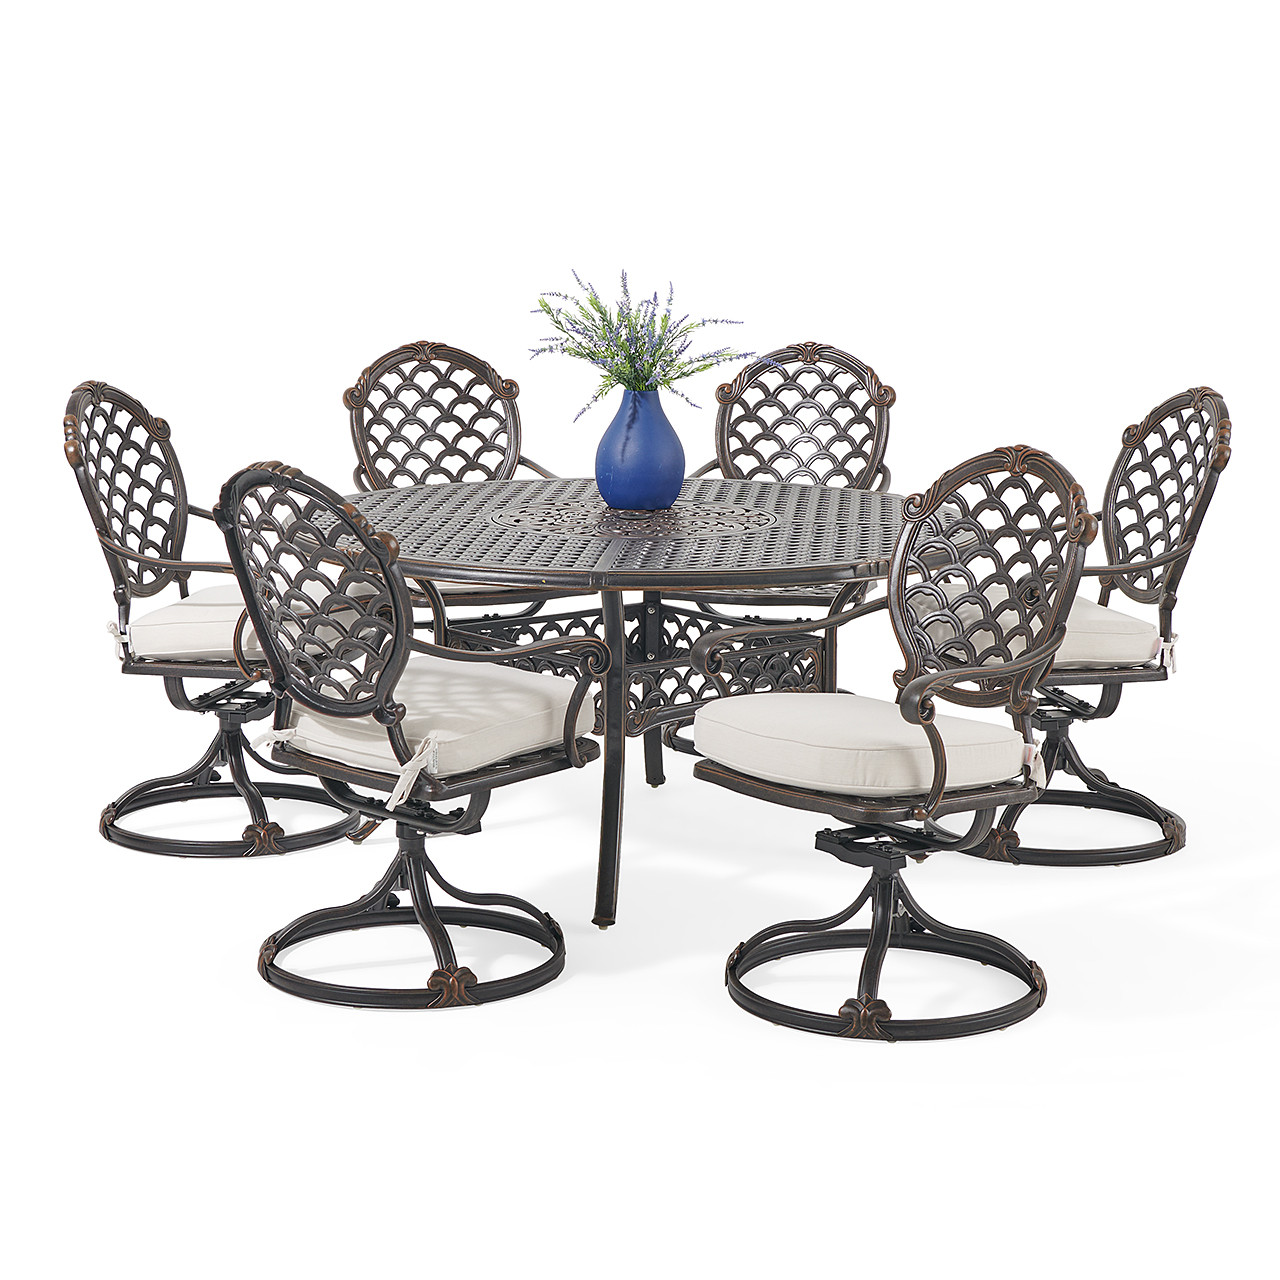 Bordeaux Golden Bronze Cast Aluminum with Cushions 7 Piece Swivel Dining Set + 60 in. D Table with Inlaid Lazy Susan